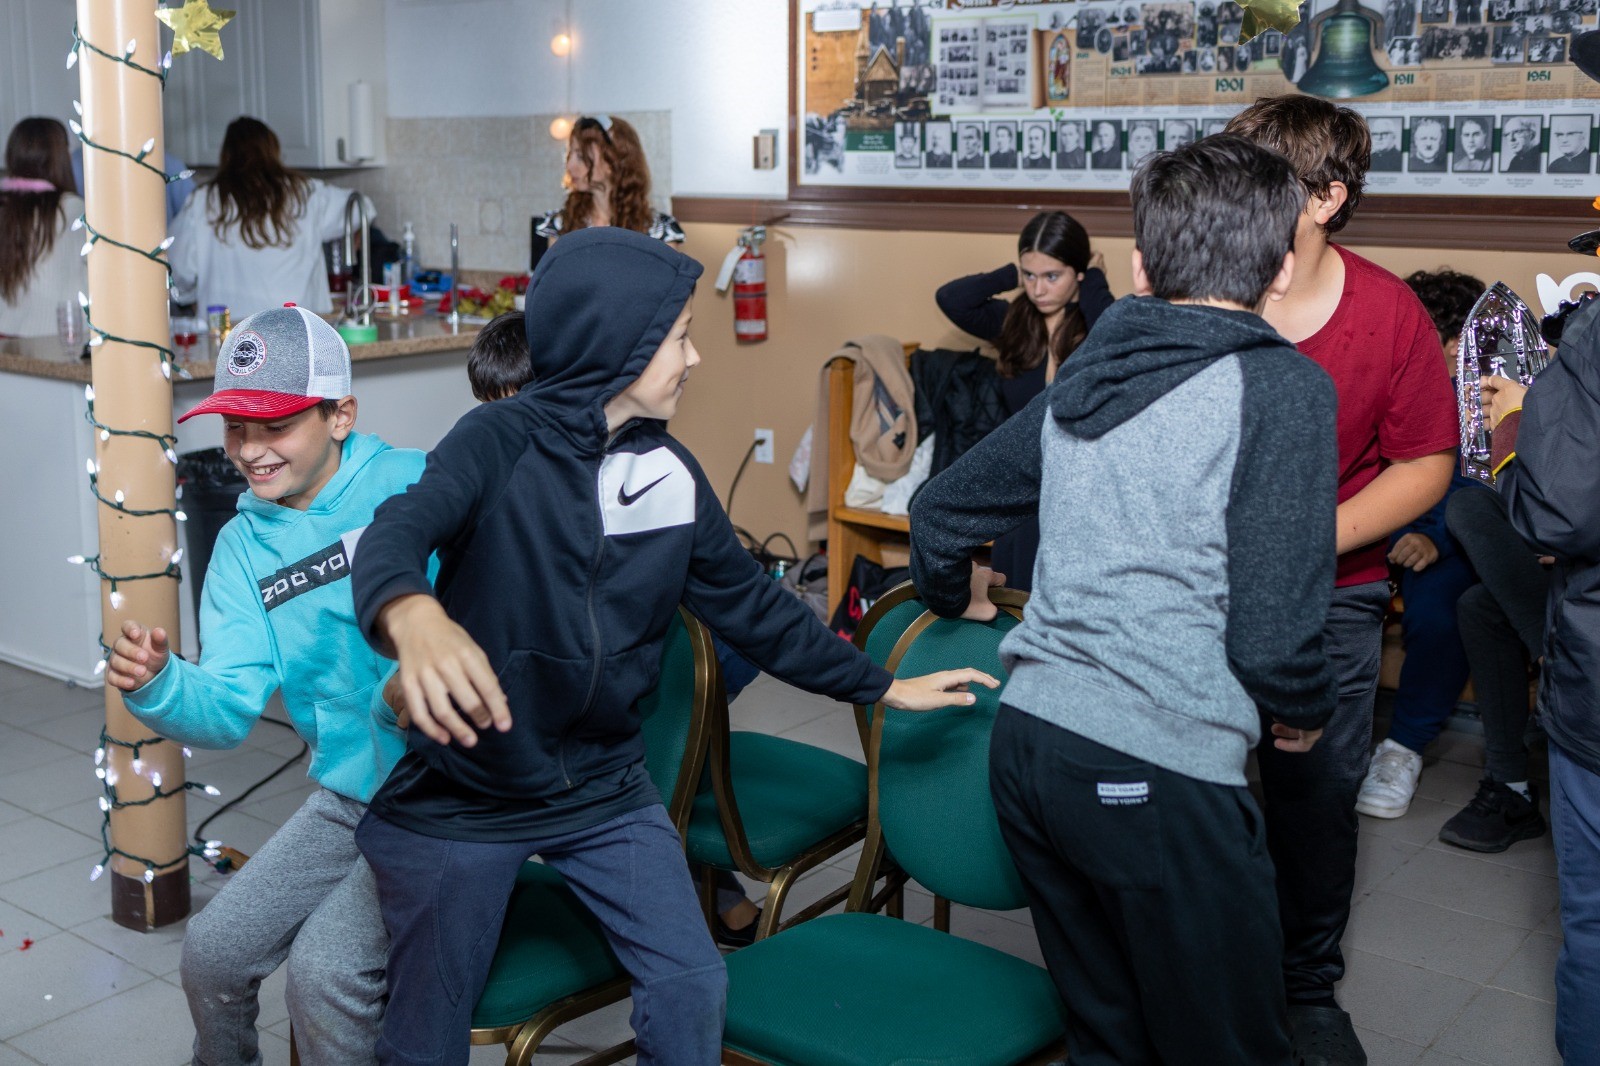 A group of boys playing musical chairs